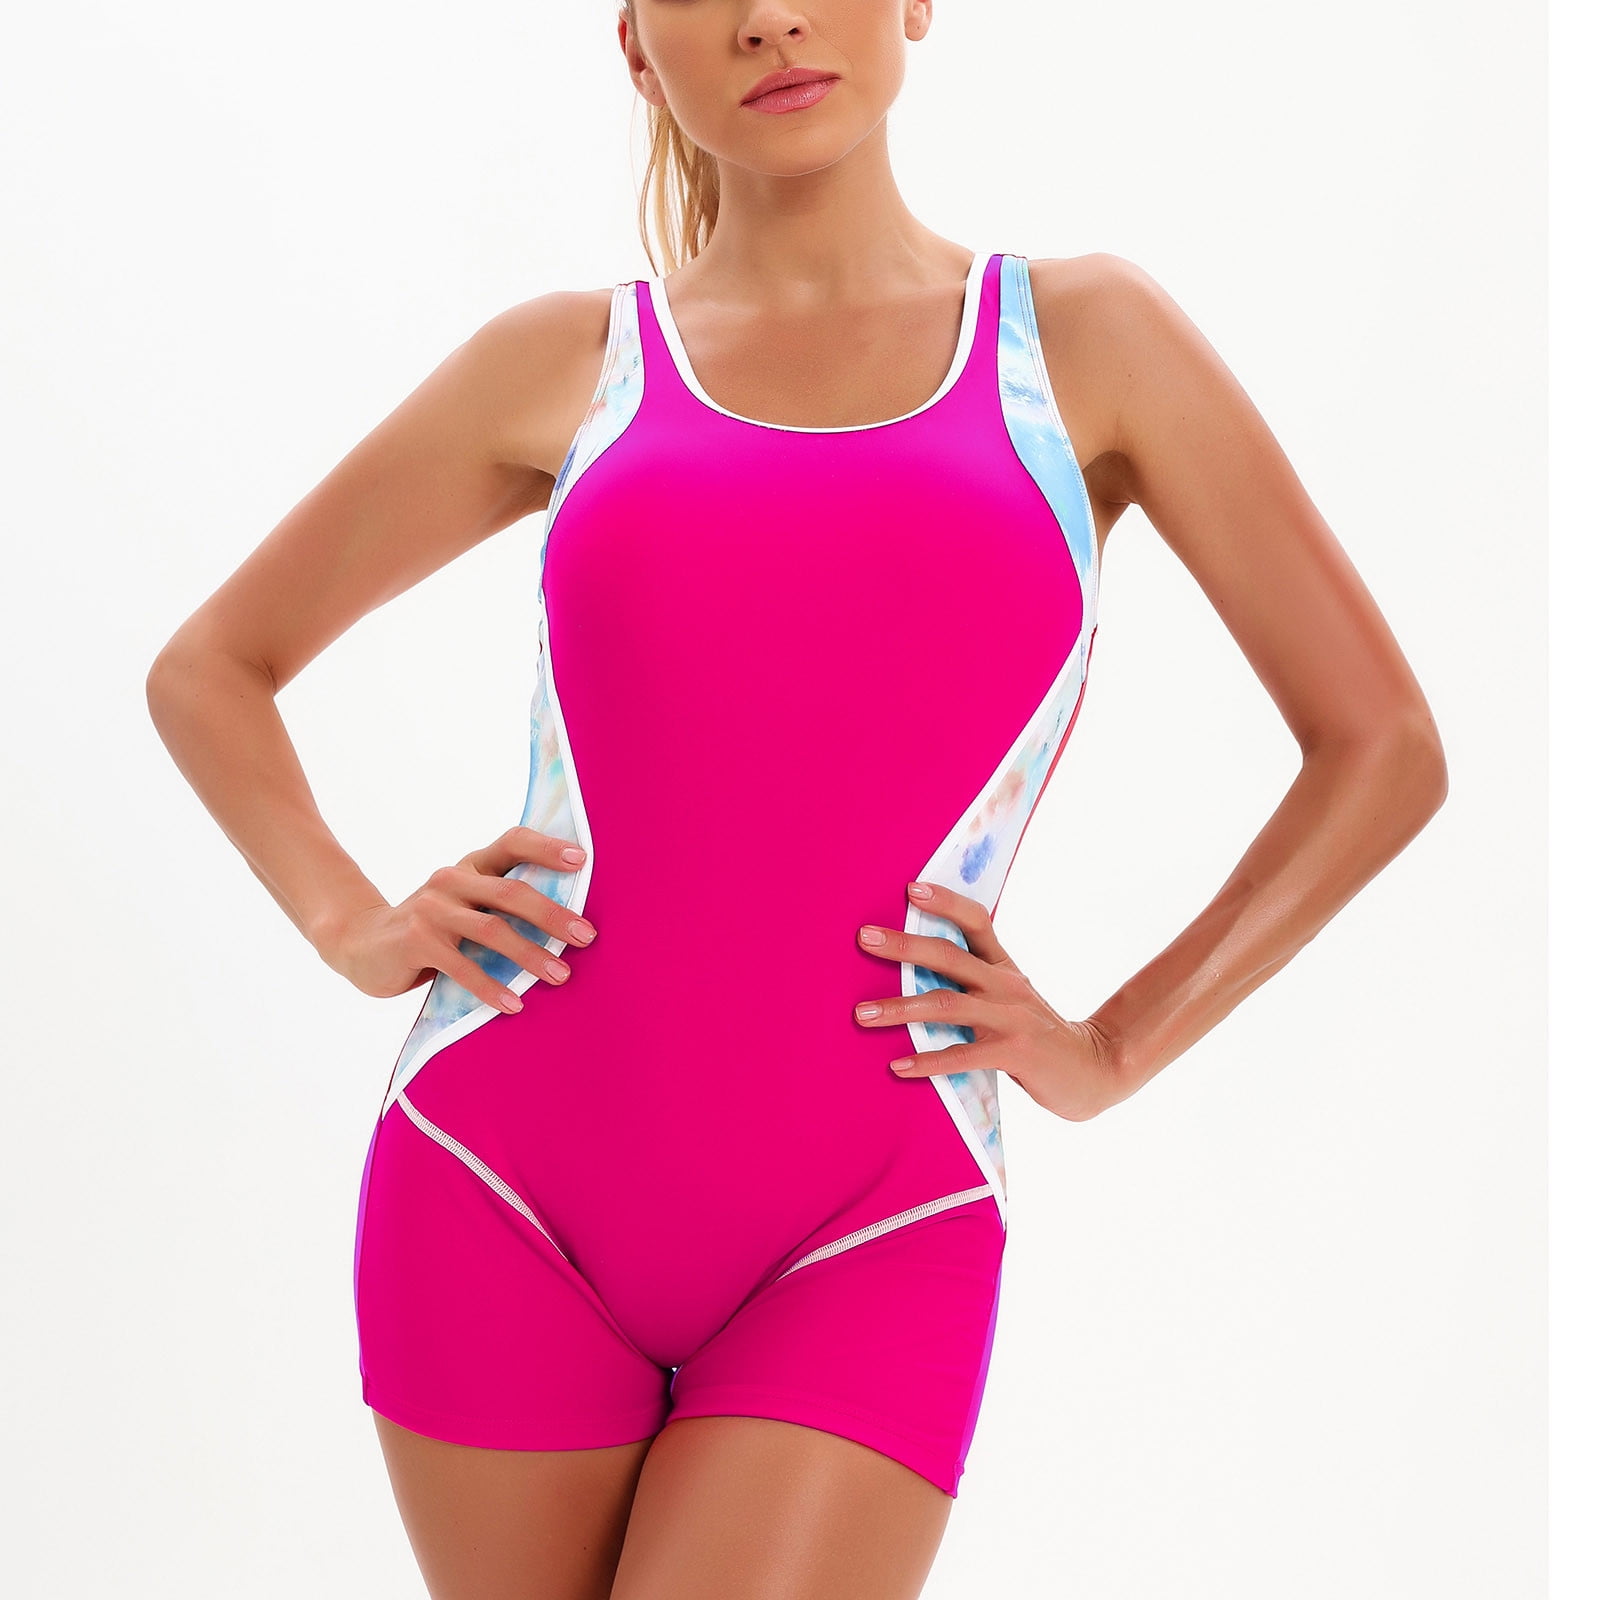 OVBMPZD Women's Comfy One-Piece Swimwear Sports Yoga Gym Suit Conservative  Color-blocking Sexy Backless Swimwear Hot Pink S